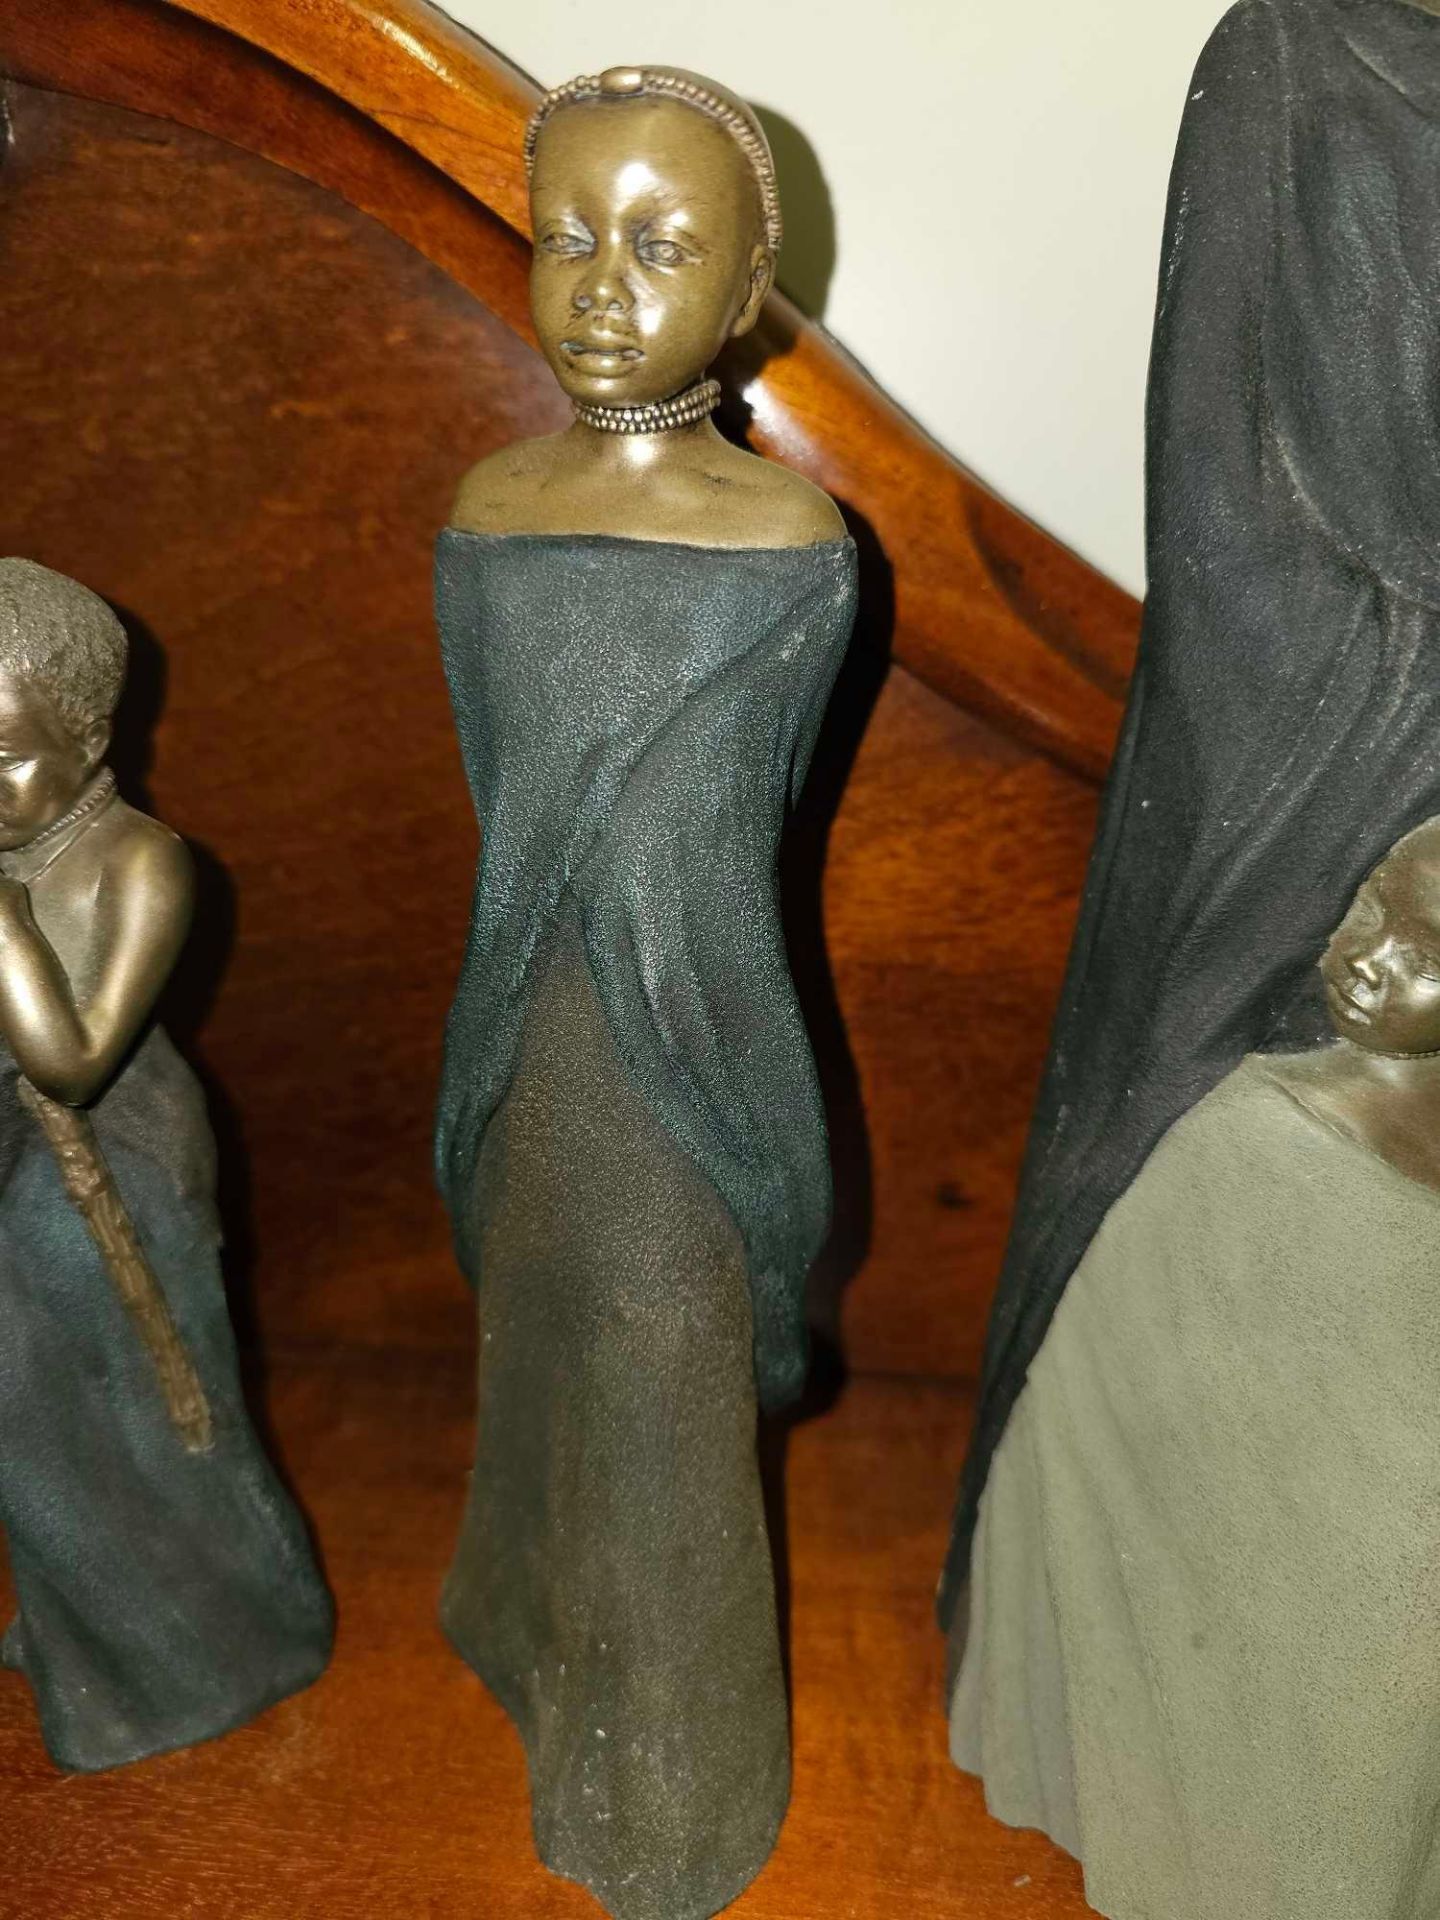 Stacy Bayne Maasai Soul Journey Bronze/Painted Limited Edition Figurines x 5 - Image 5 of 6